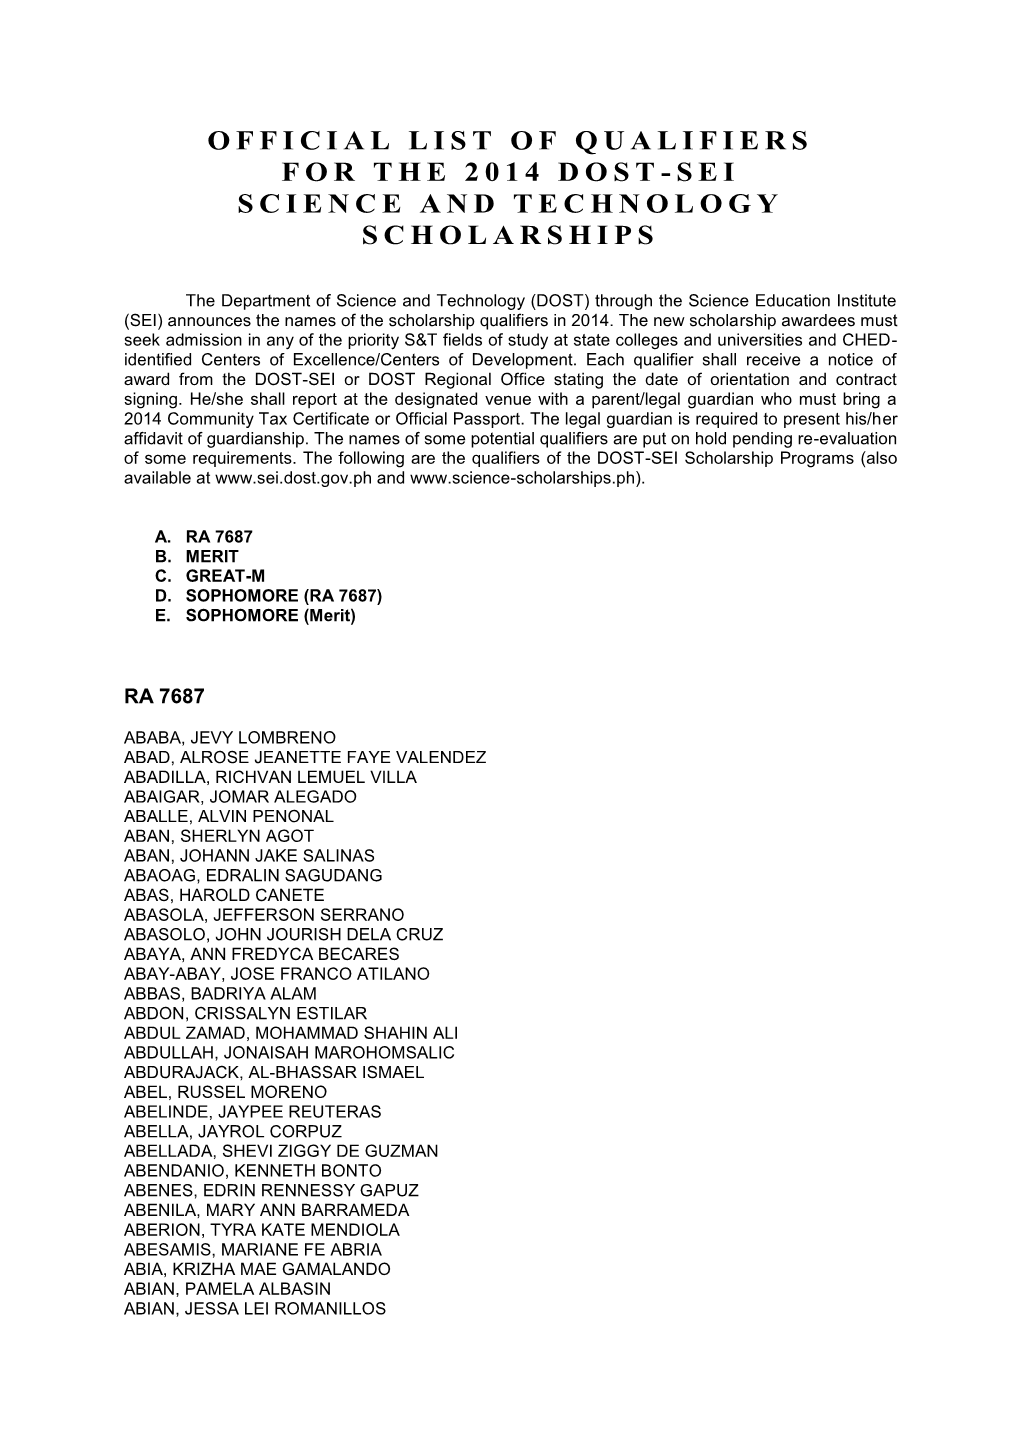 Official List of Qualifiers for the 2014 Dost-Sei Science and Technology